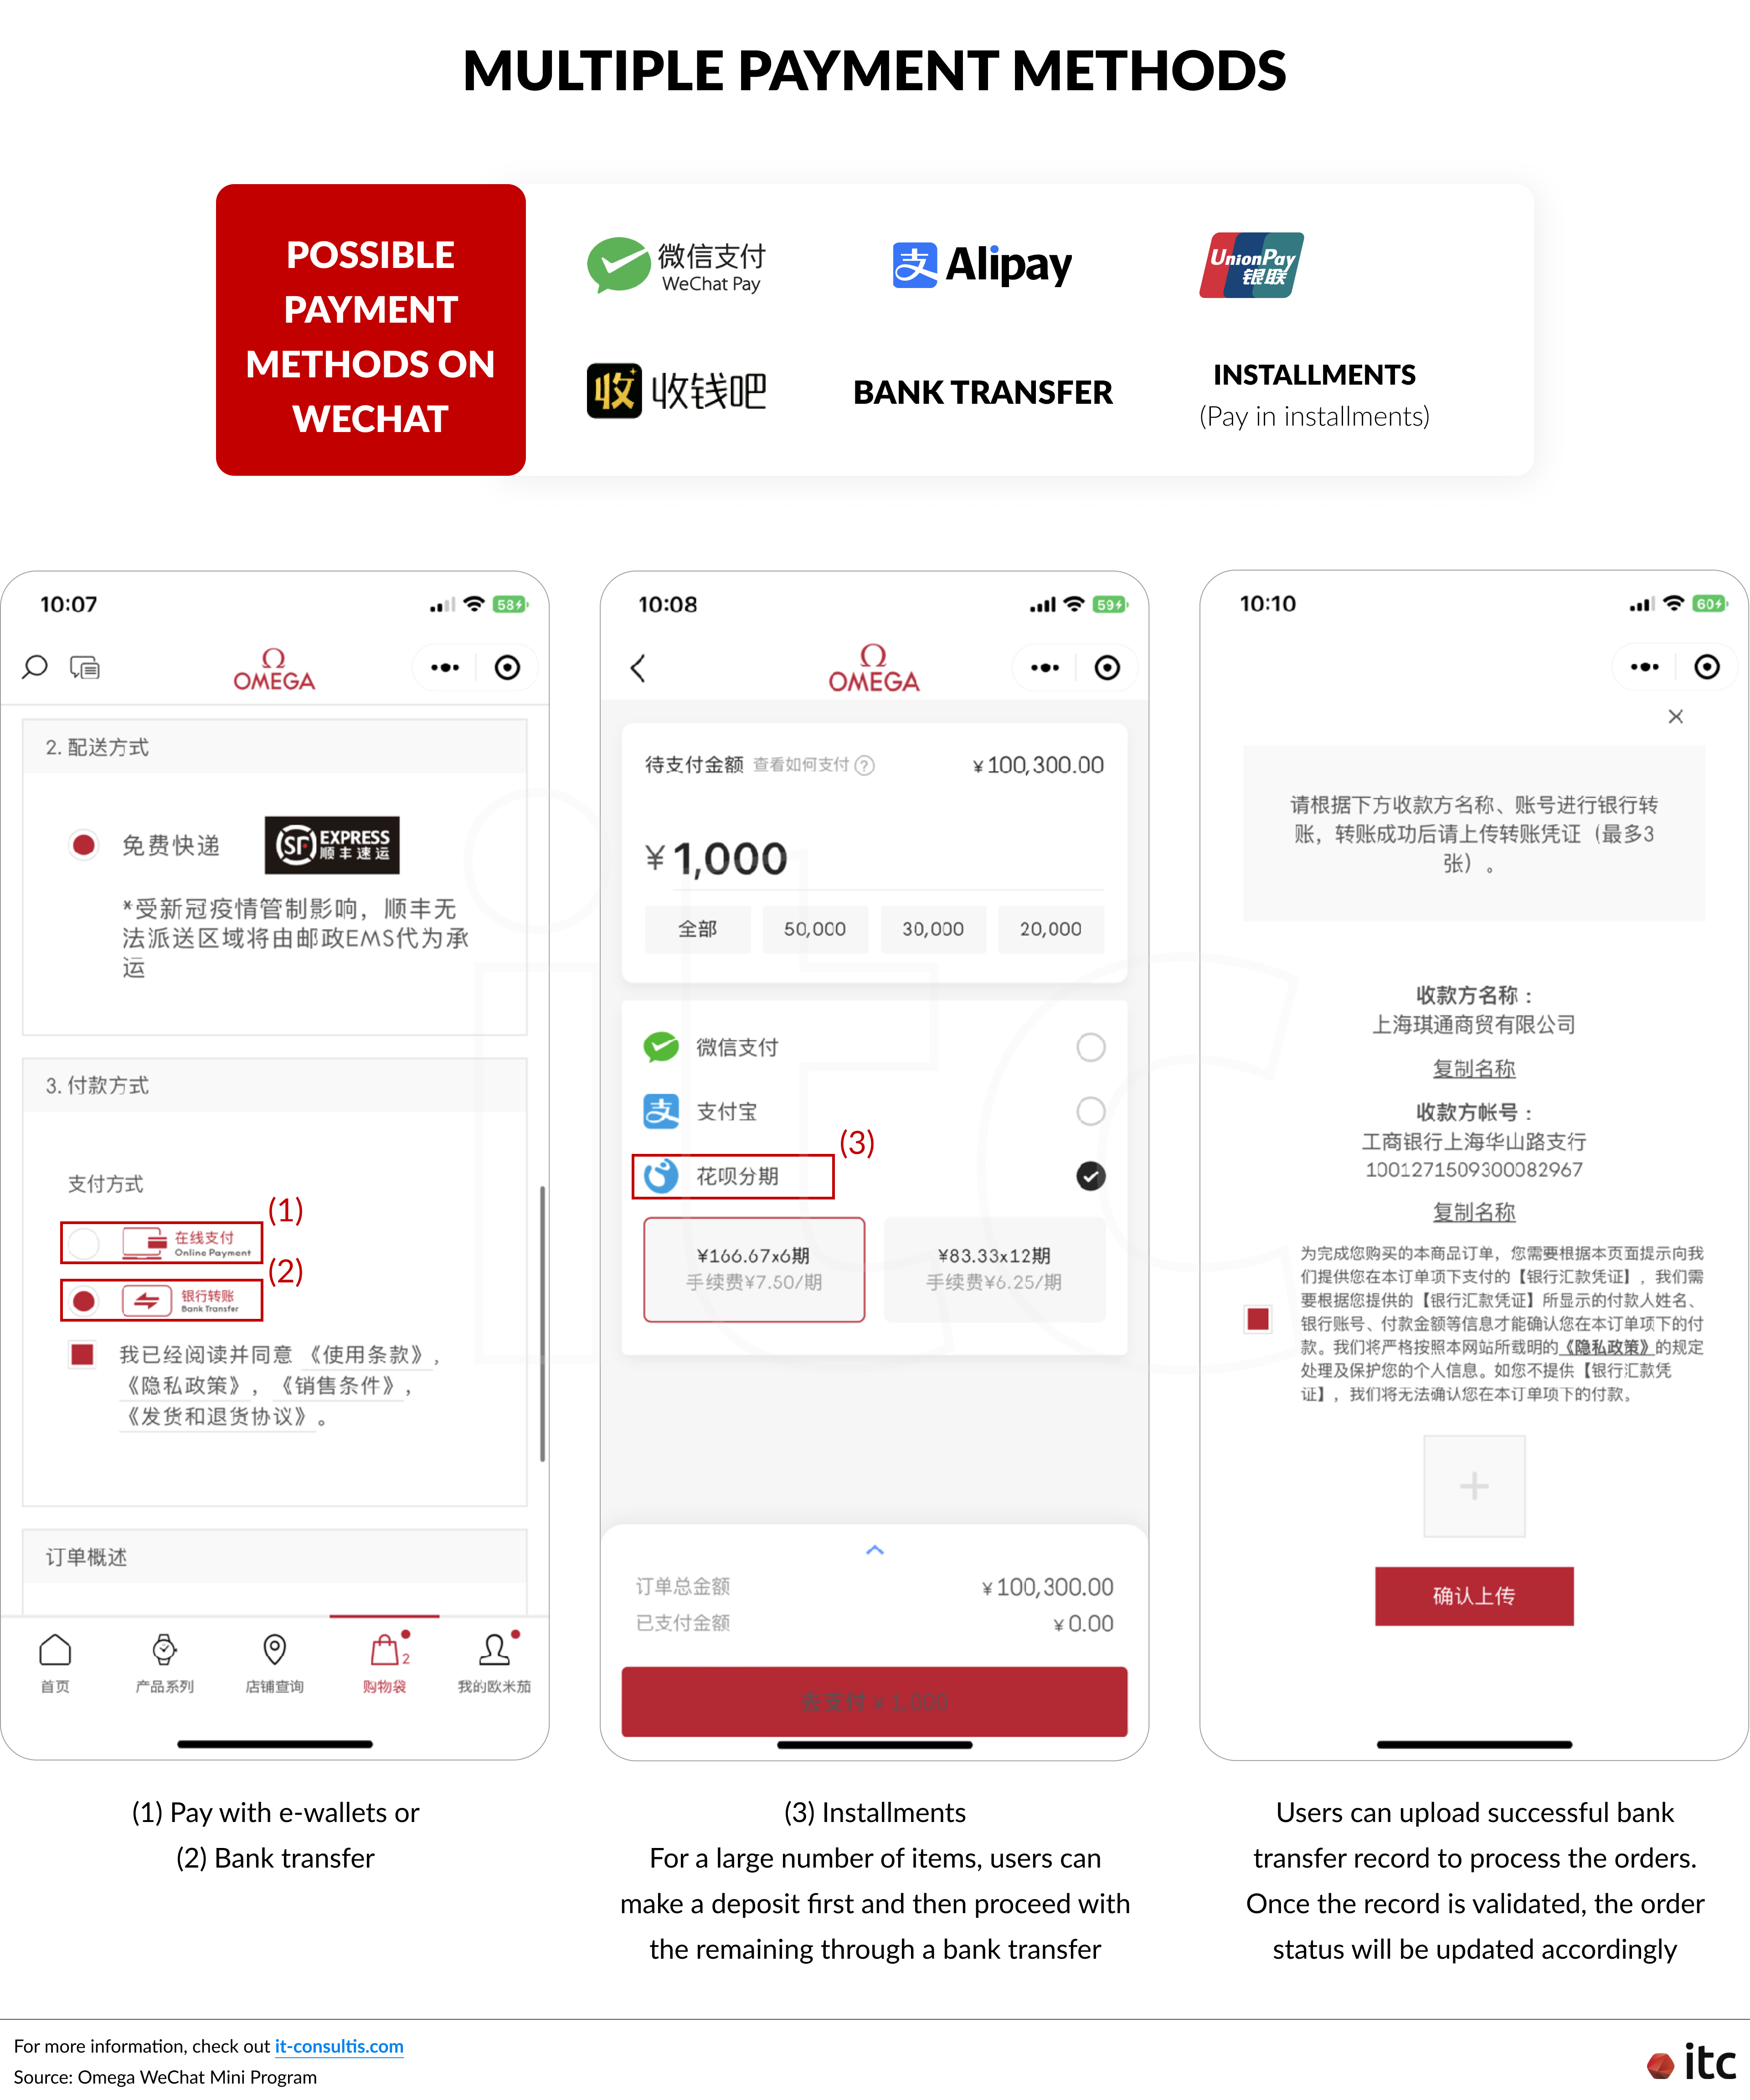 Omega accommodating a special invoicing method on its WeChat Mini Program by splitting the invoicing amounts into a deposit and a final amount to be paid later